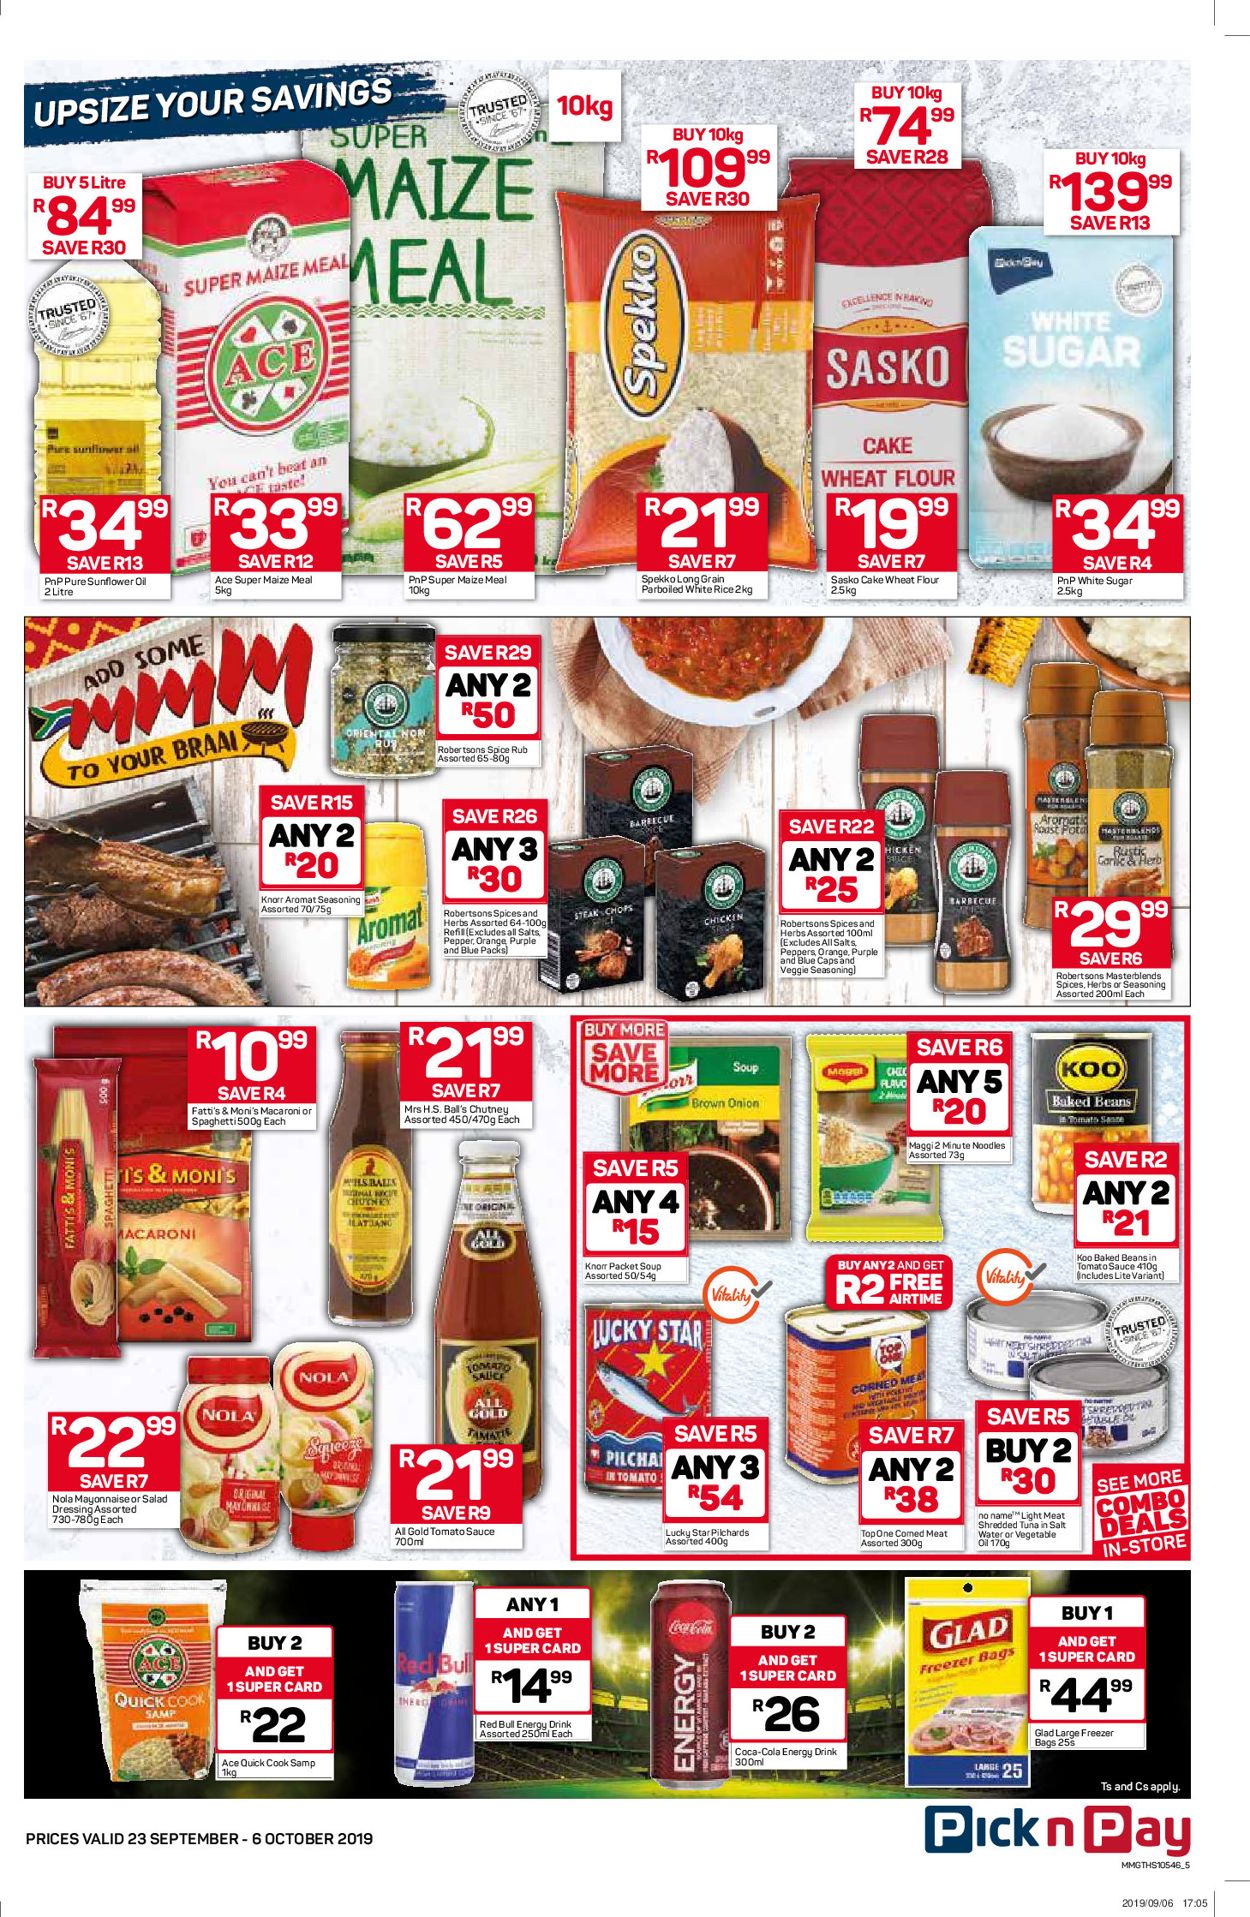 Pick n Pay Catalogue - 2019/09/23-2019/10/06 (Page 6)